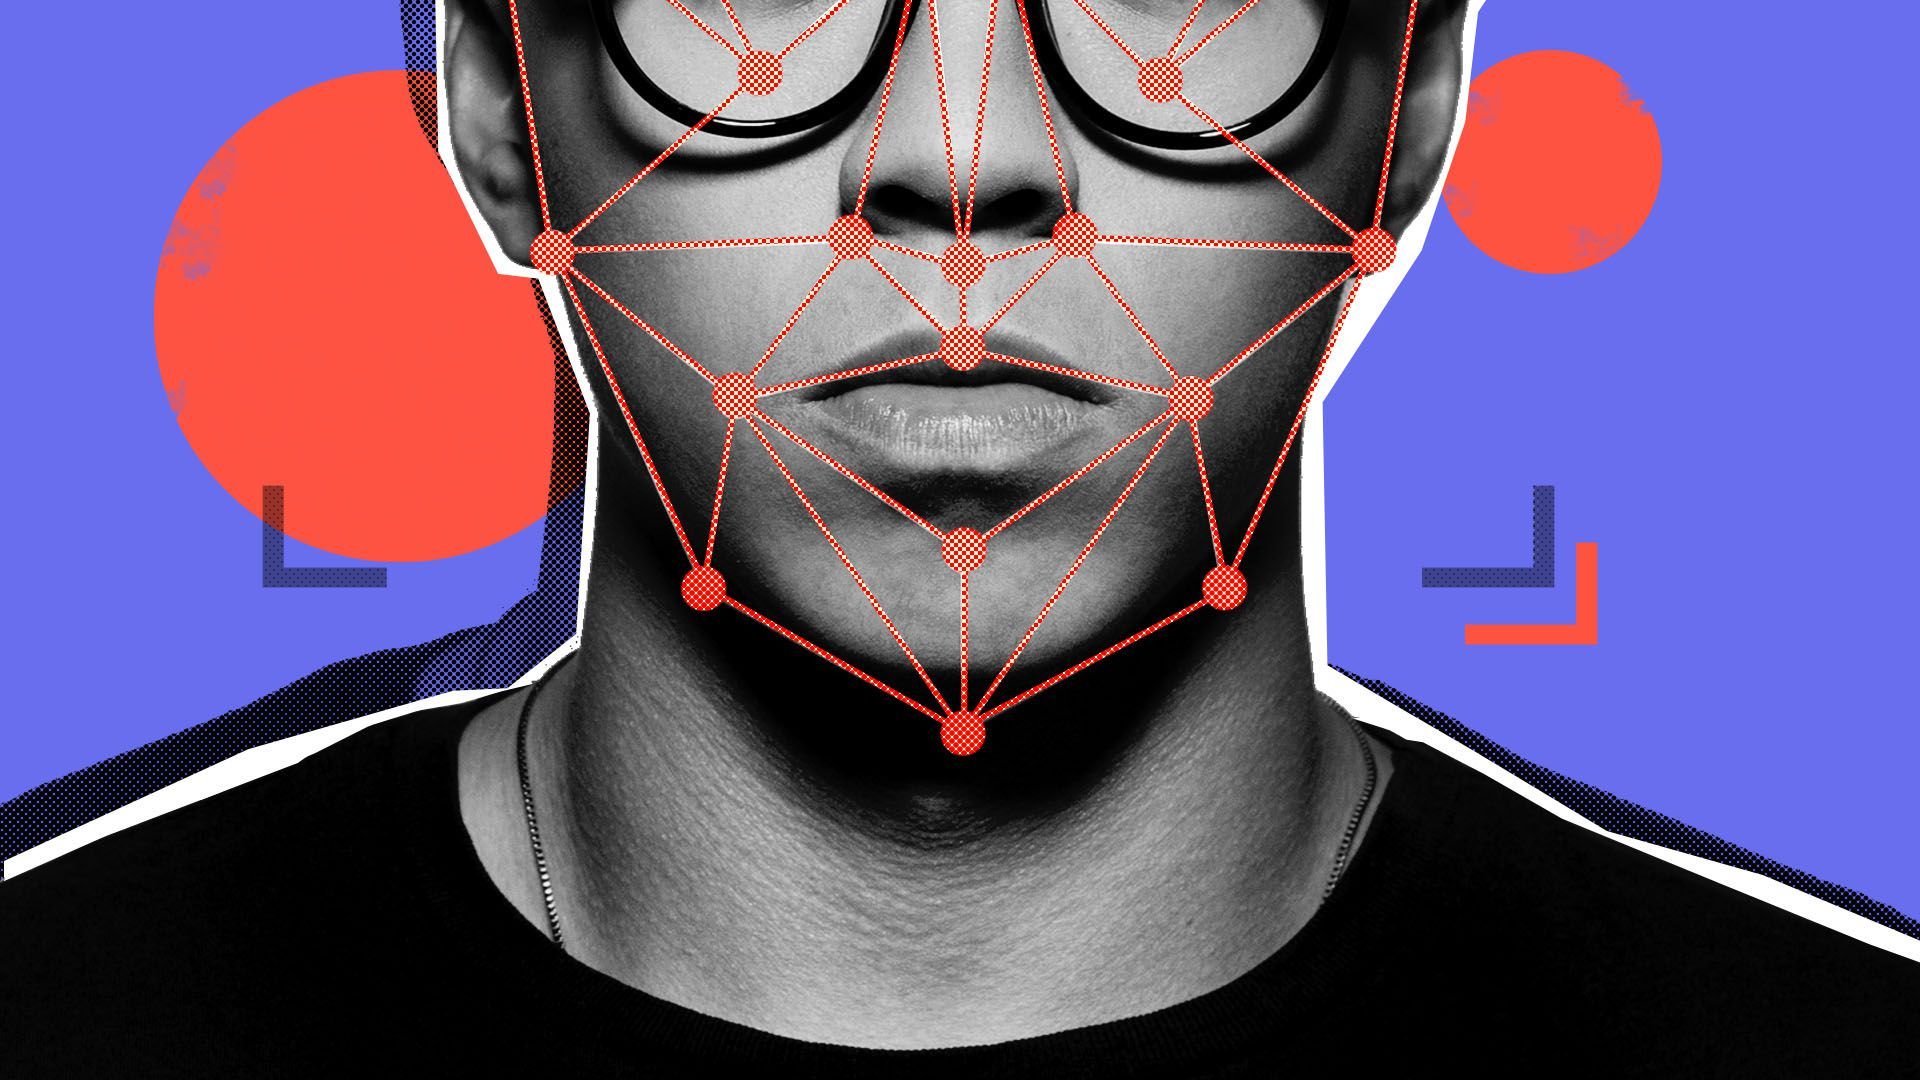 Illustration of a person's face under scrutiny from facial recognition technology